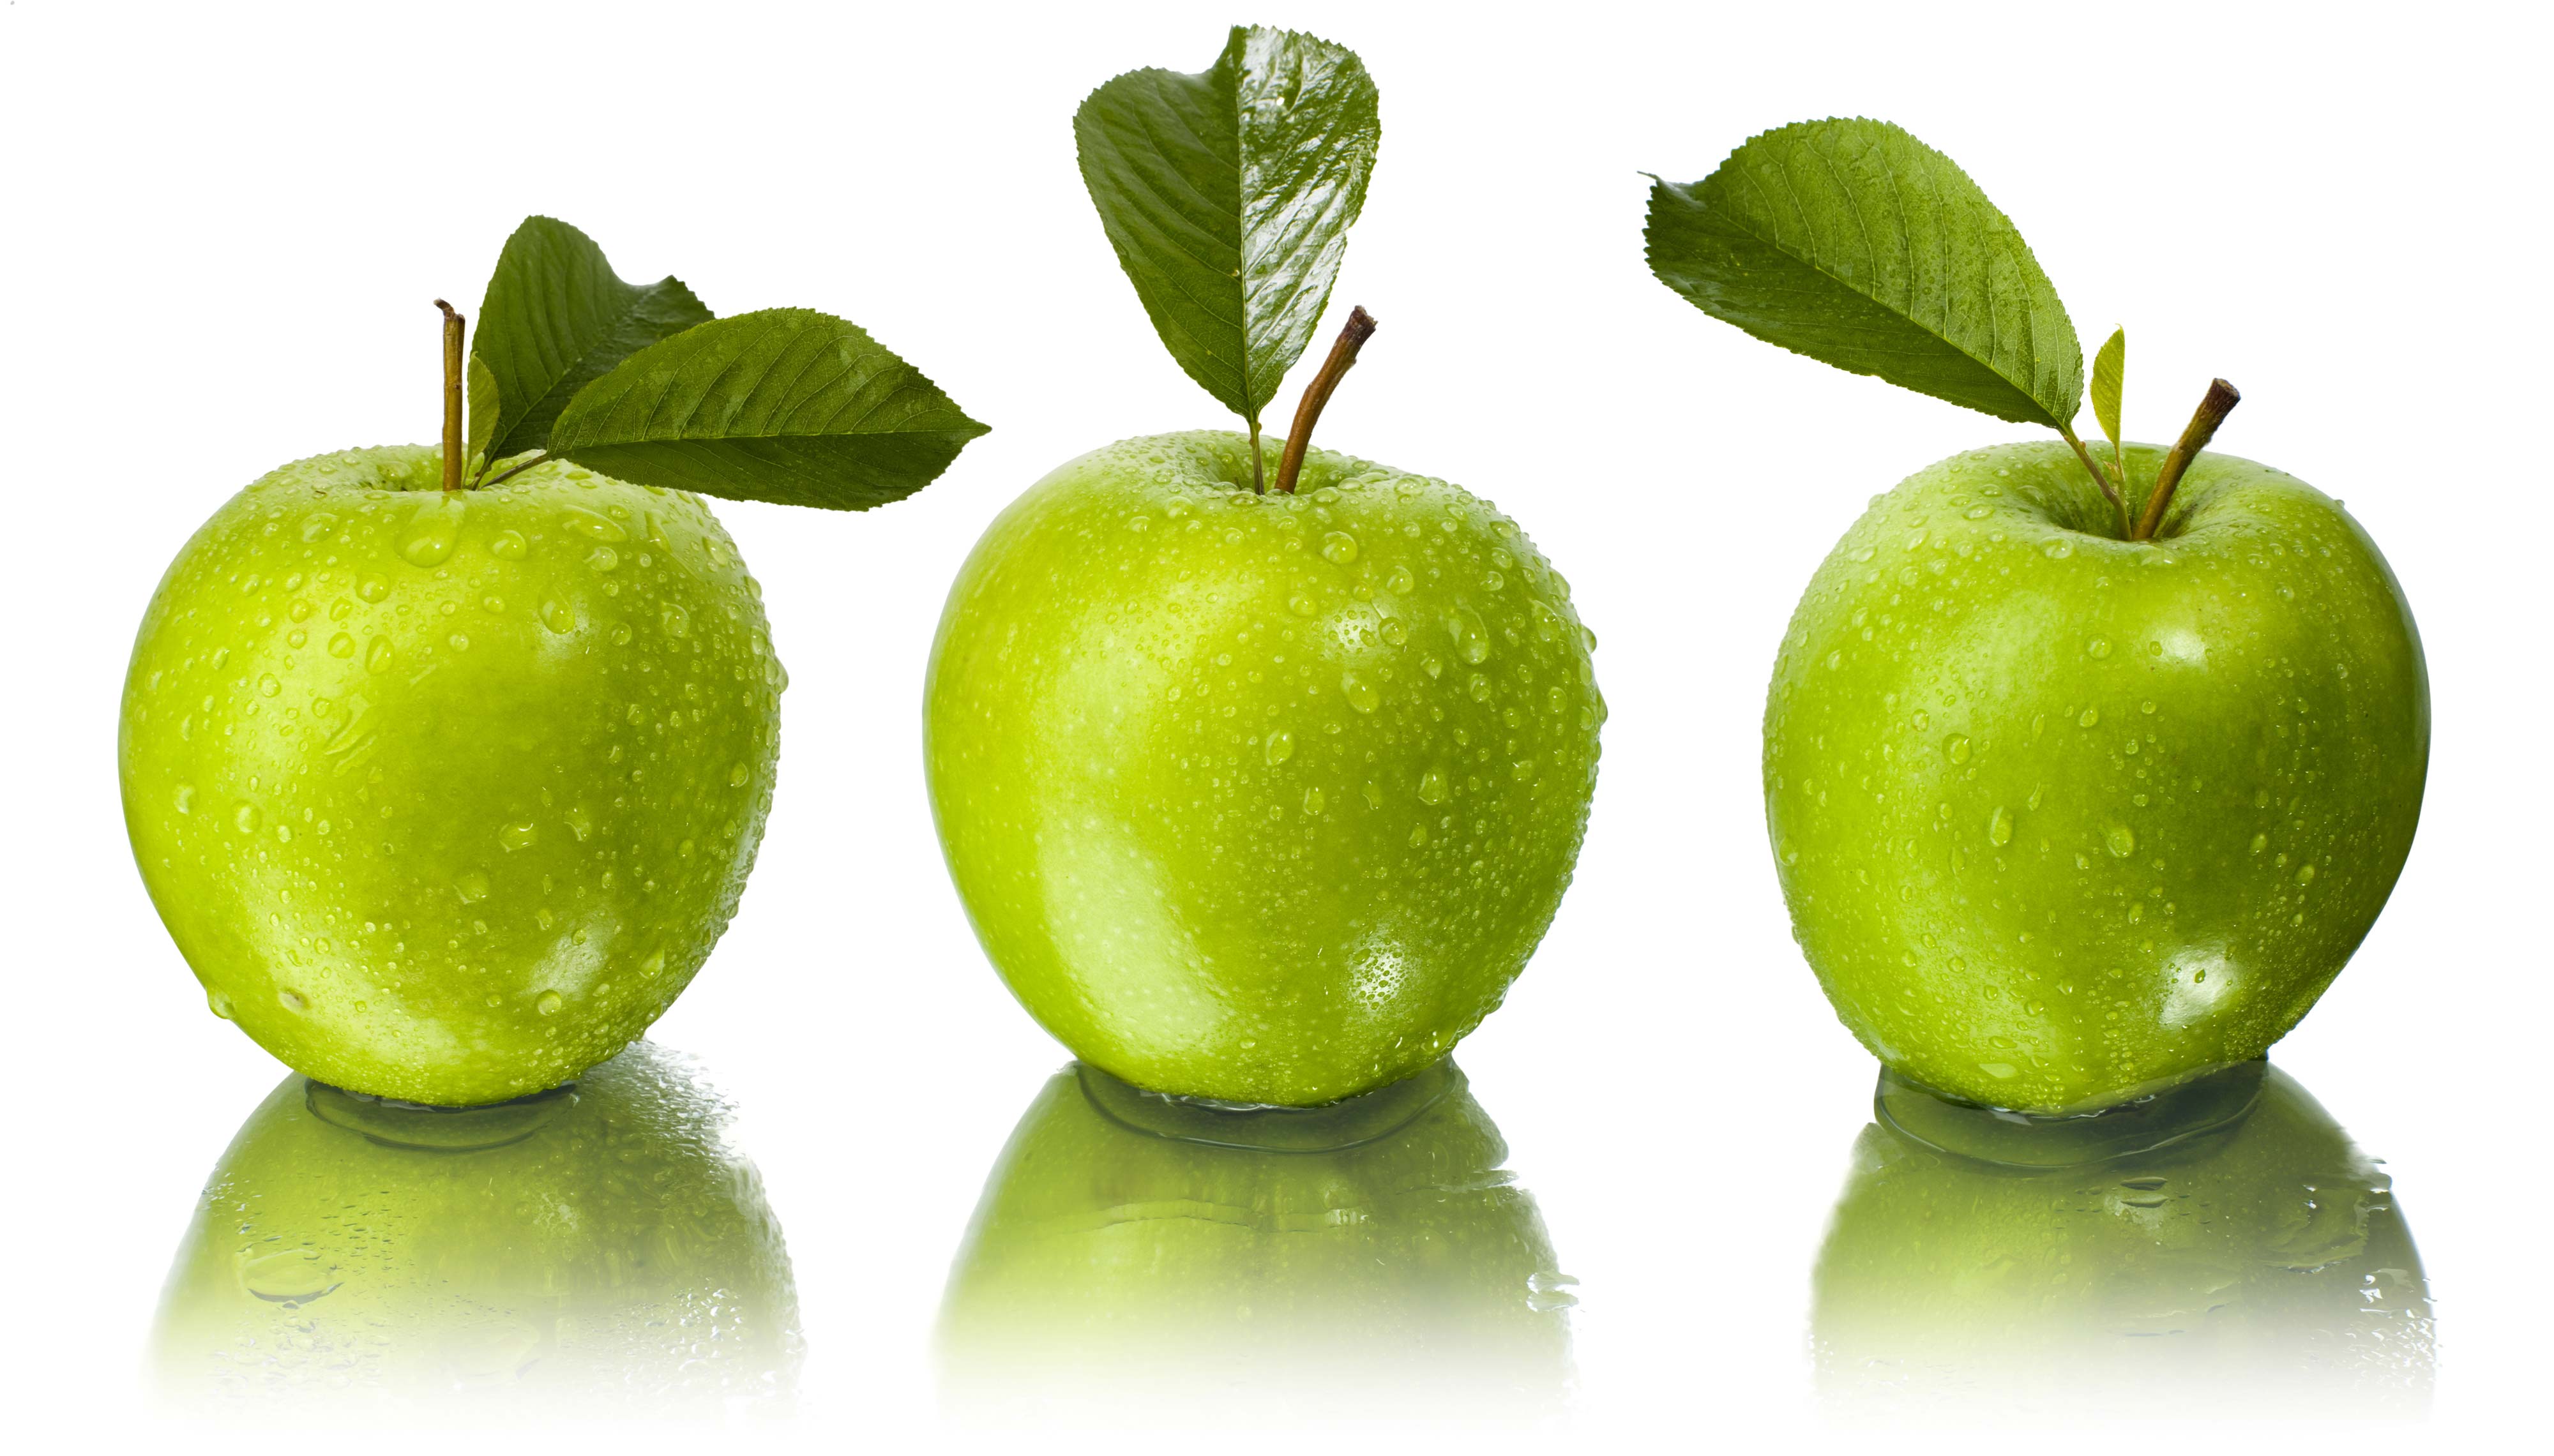 Green apple is a wise choice | romanmyko